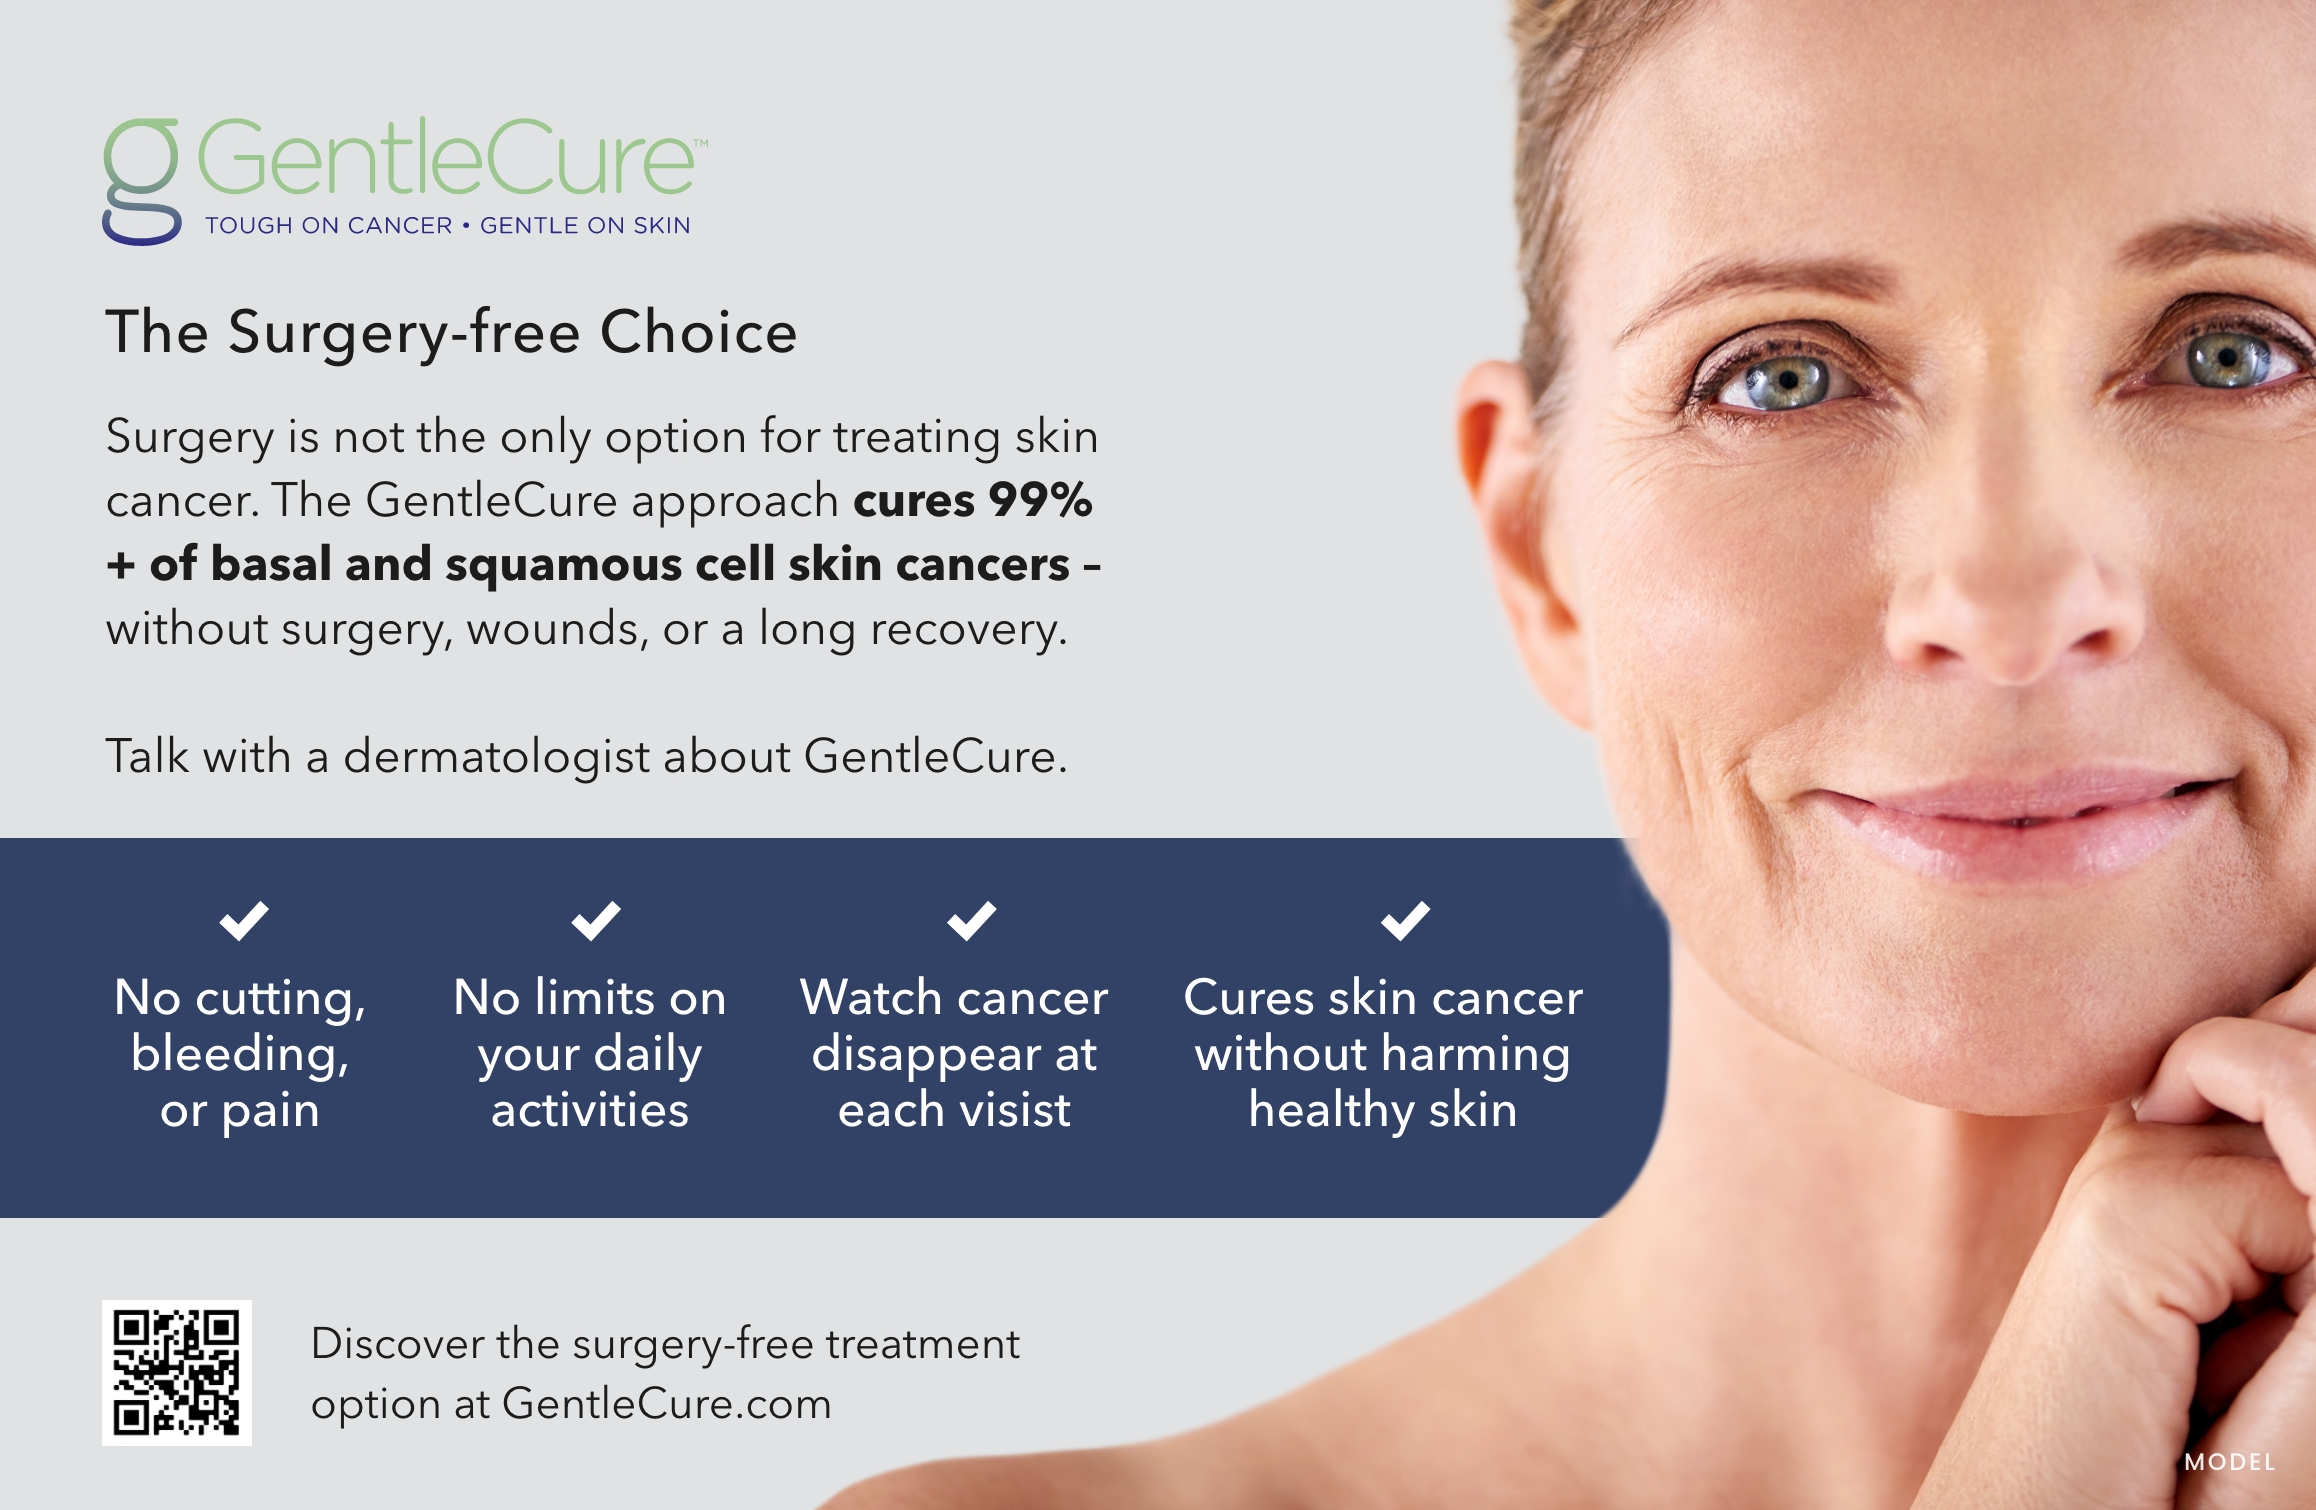 Discover the surgery-free skin cancer treatment option at gentlecure.com